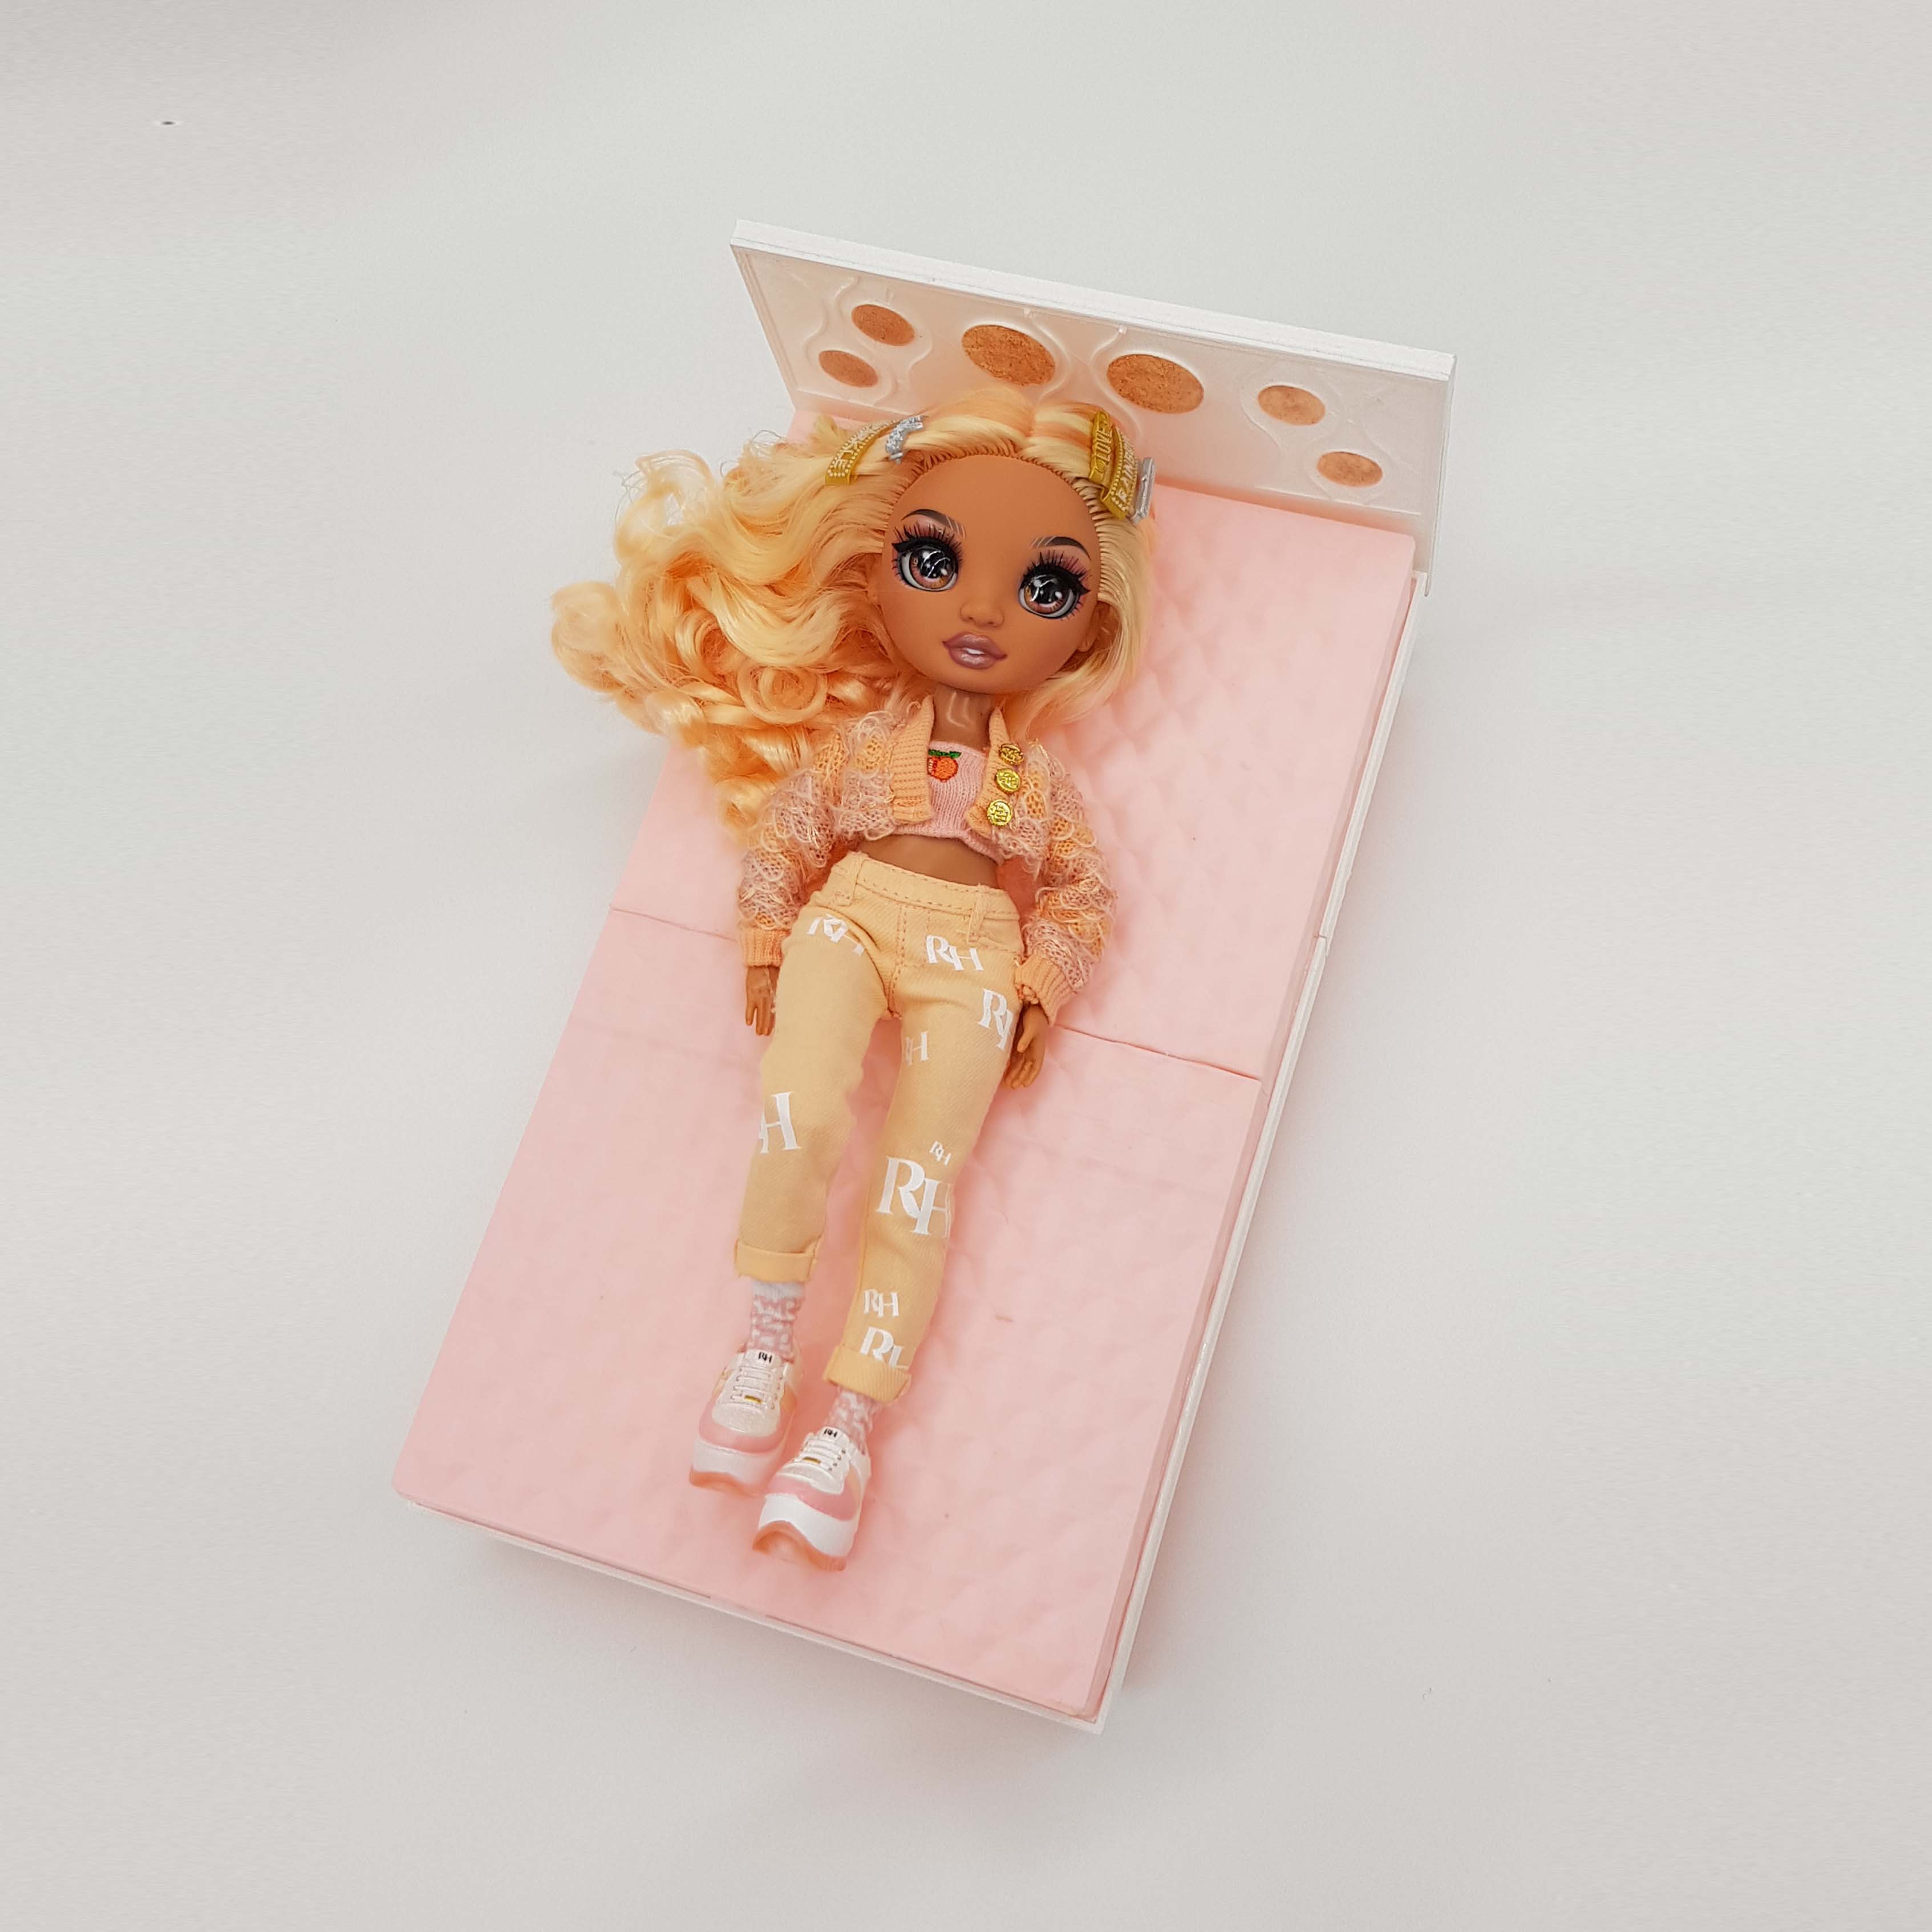 Doll Bed ,Barbie Bed ,Rainbow high doll bed, Doll Furniture. Doll House